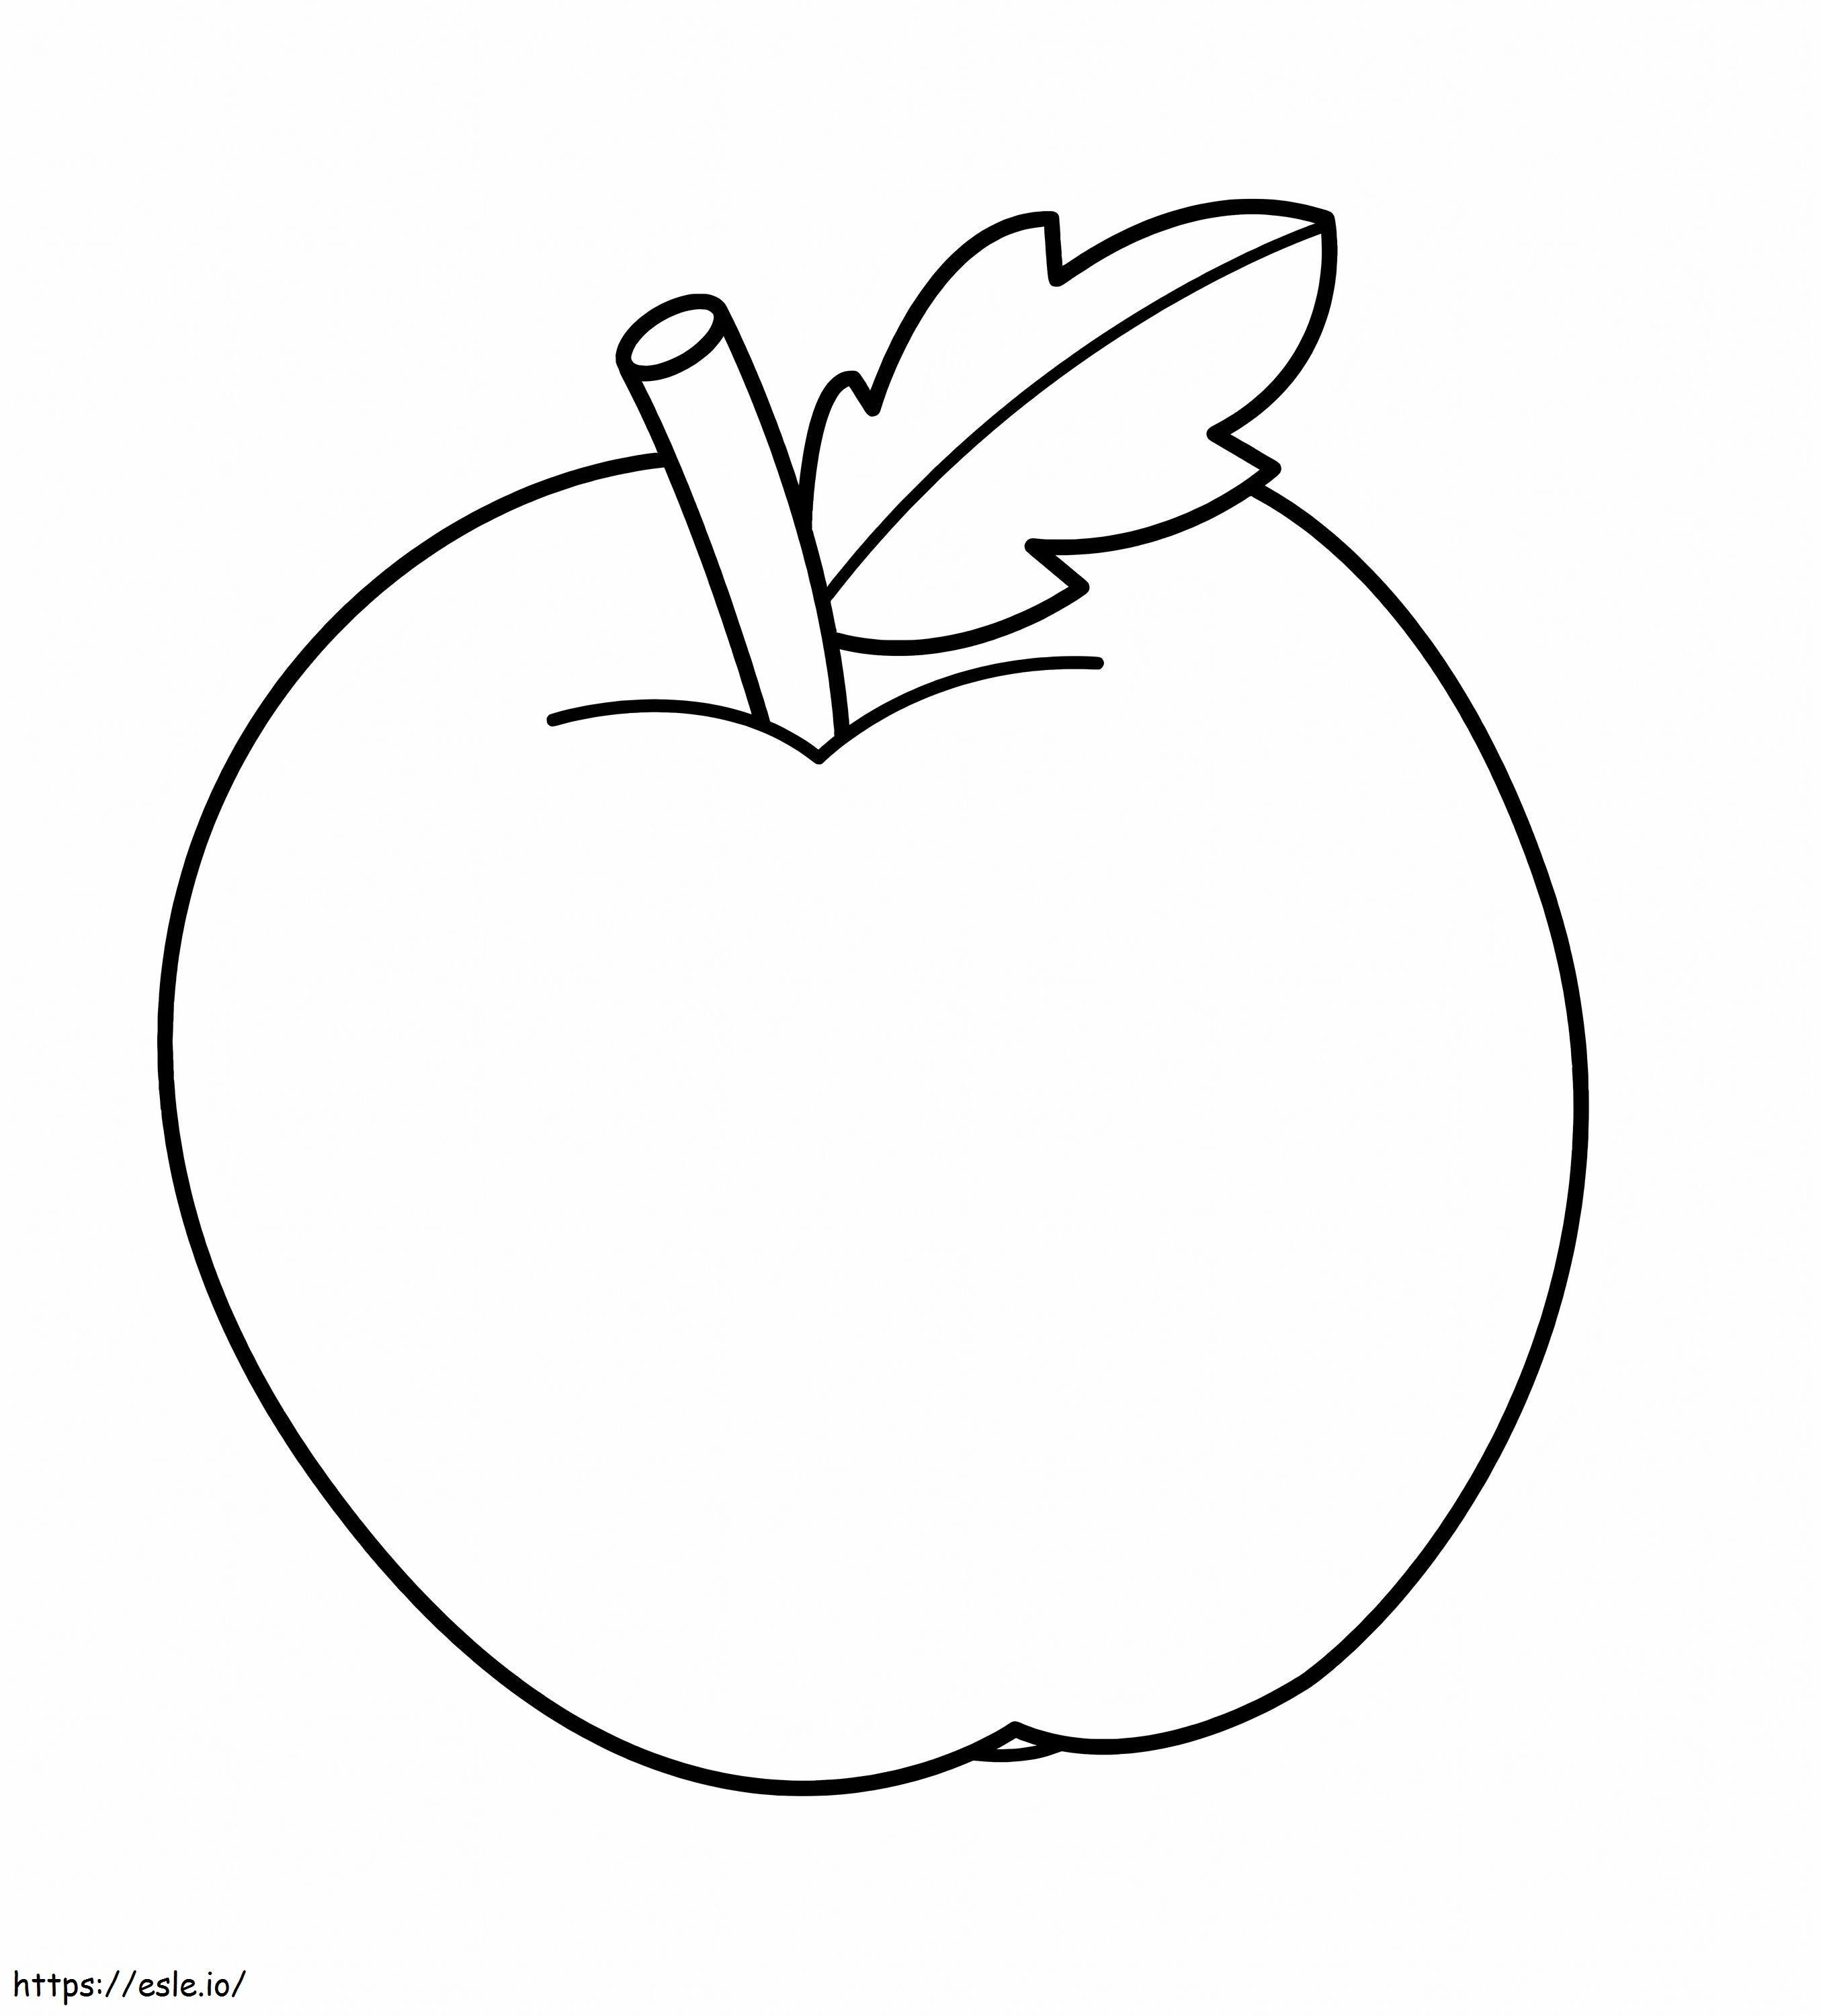 Free Apple coloring page